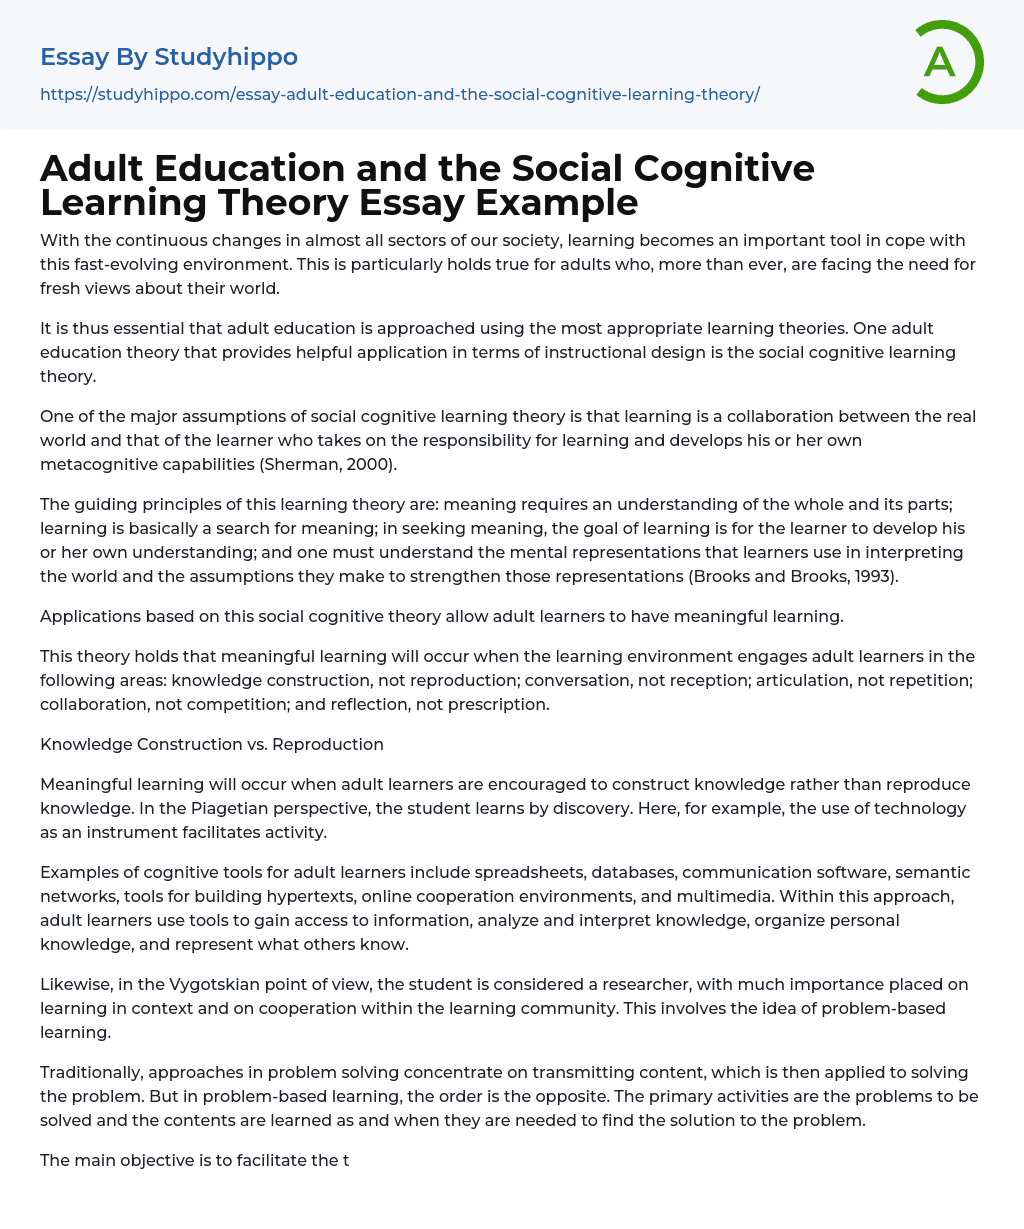 Adult Education and the Social Cognitive Learning Theory Essay Example